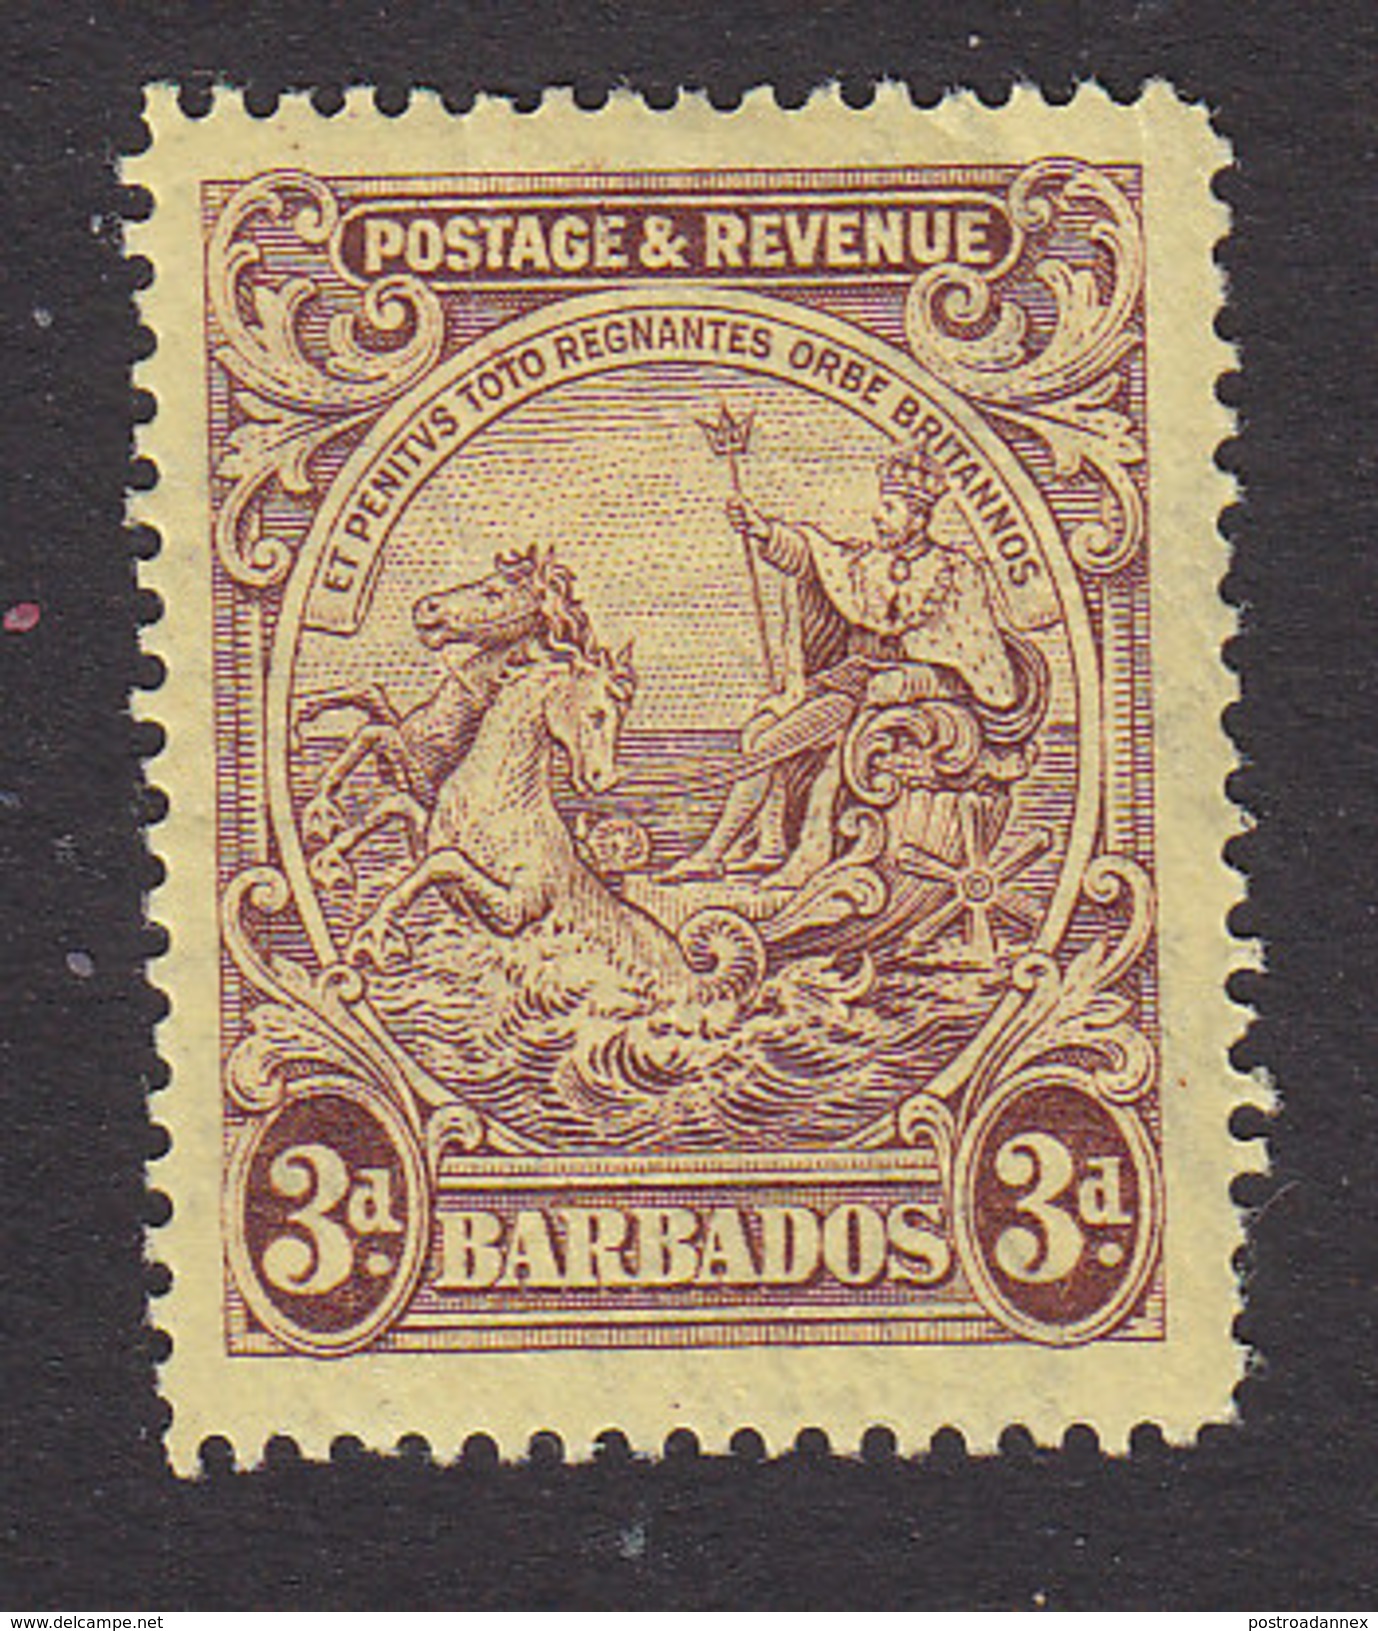 Barbados, Scott #171, Mint Hinged, Badge Of The Colony, Issued 1925 - Barbados (...-1966)